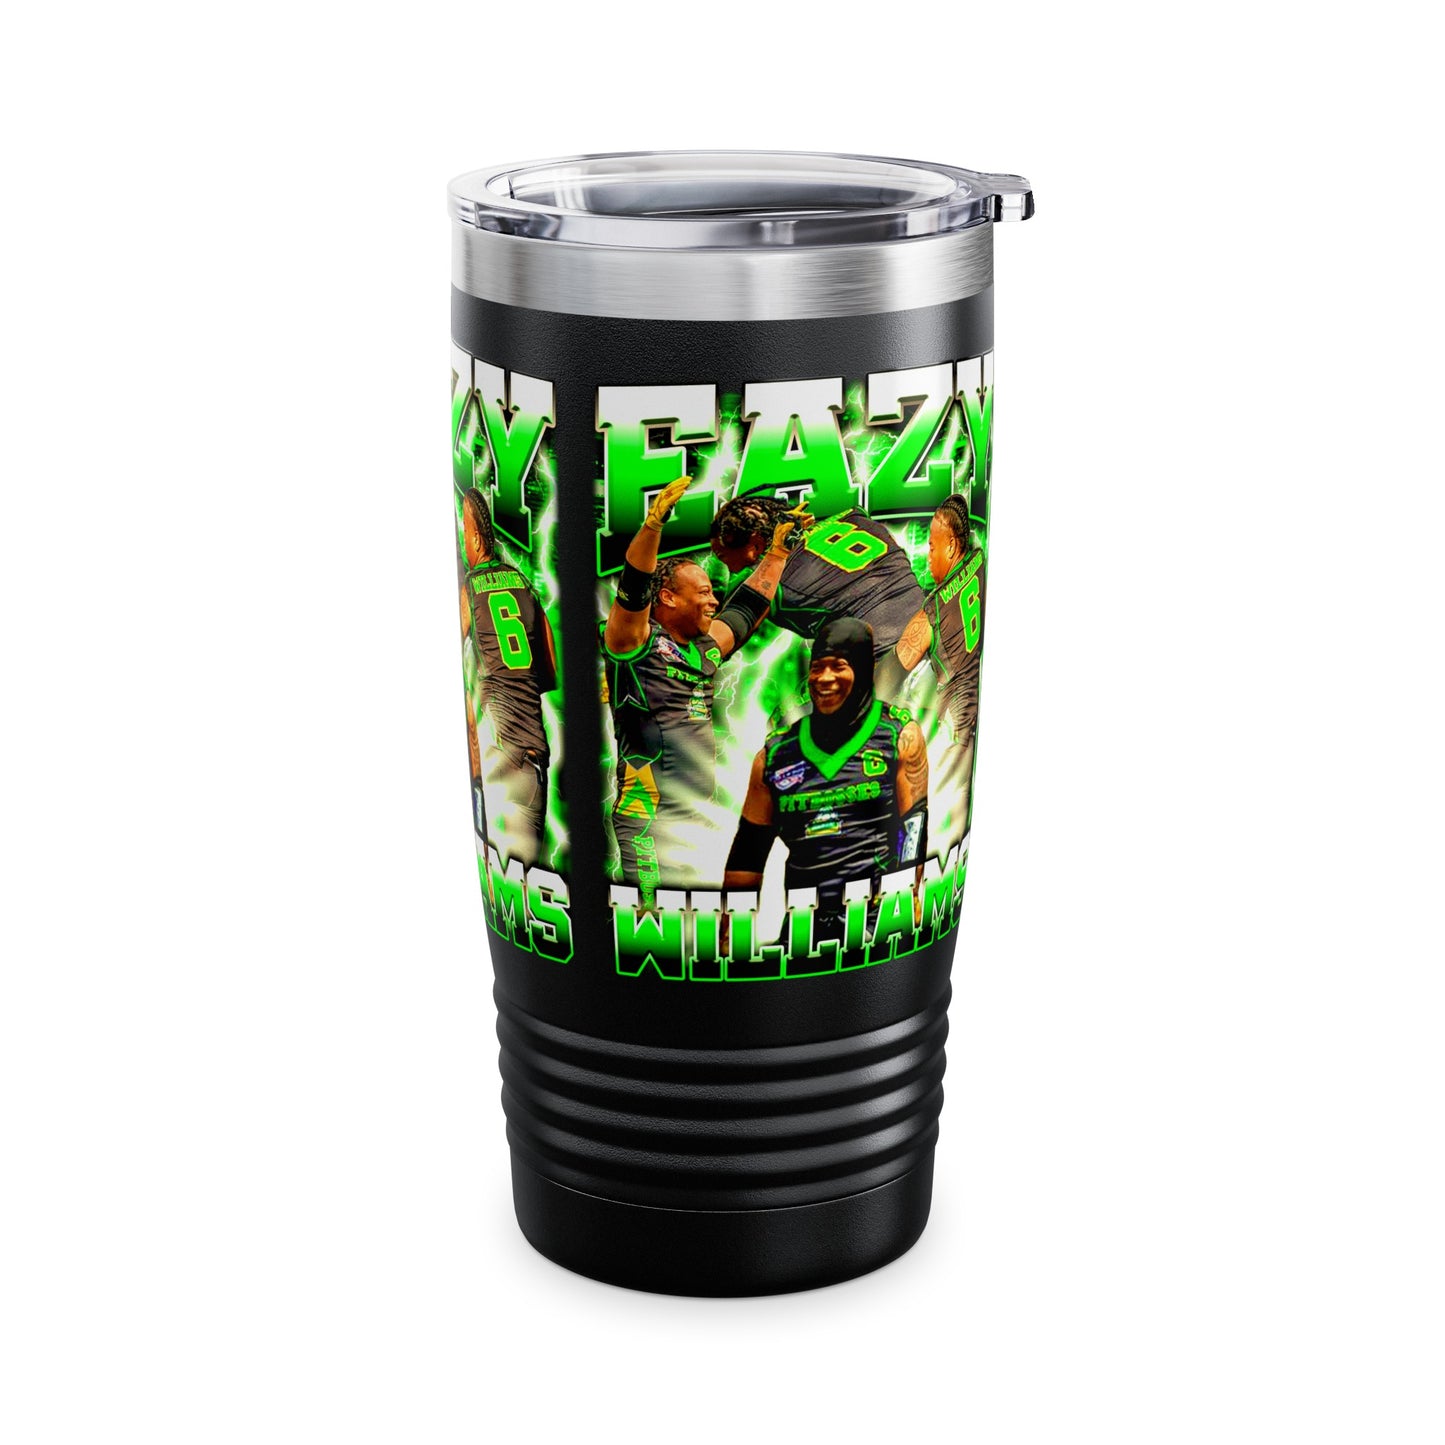 Eazy Williams Stainless Steal Tumbler